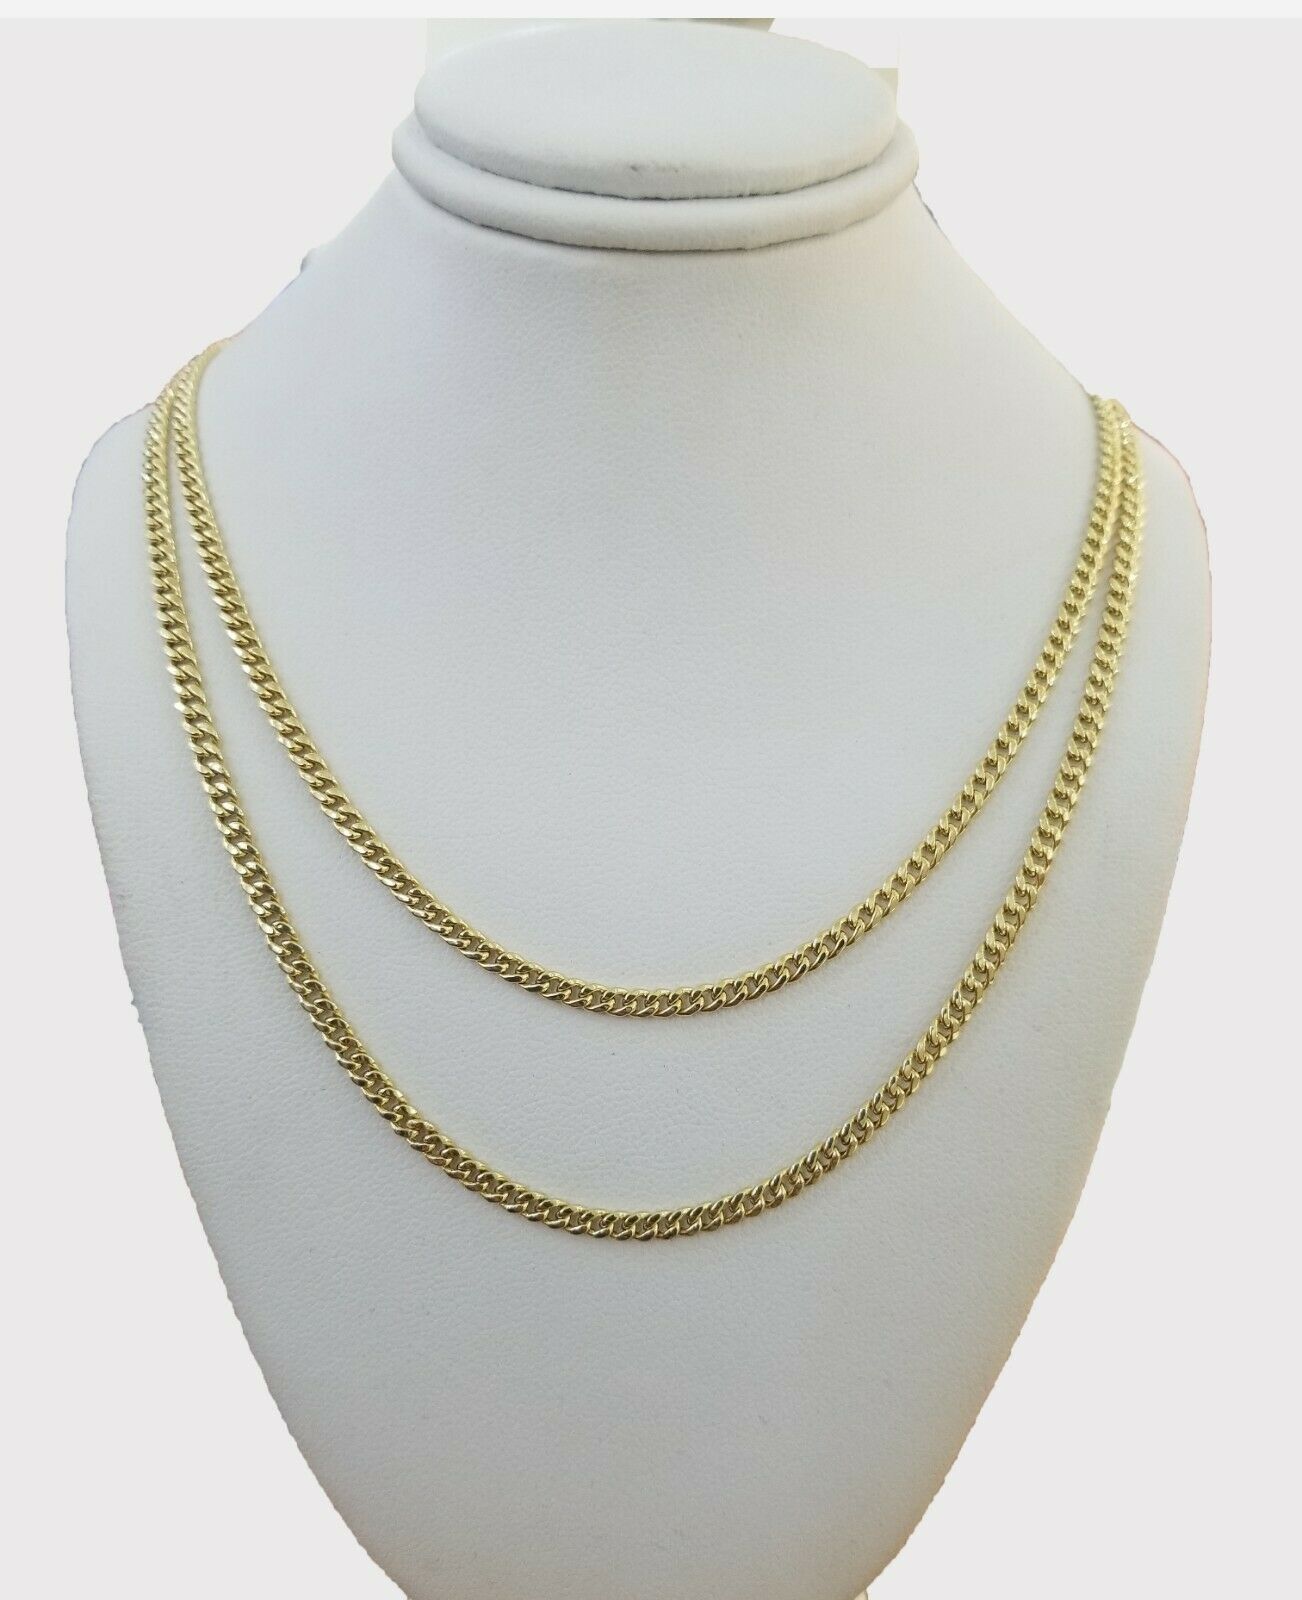 Real Gold 10kt Necklace Miami Cuban Link 16" 18" 2.5mm Women Layer Chain 2 piece